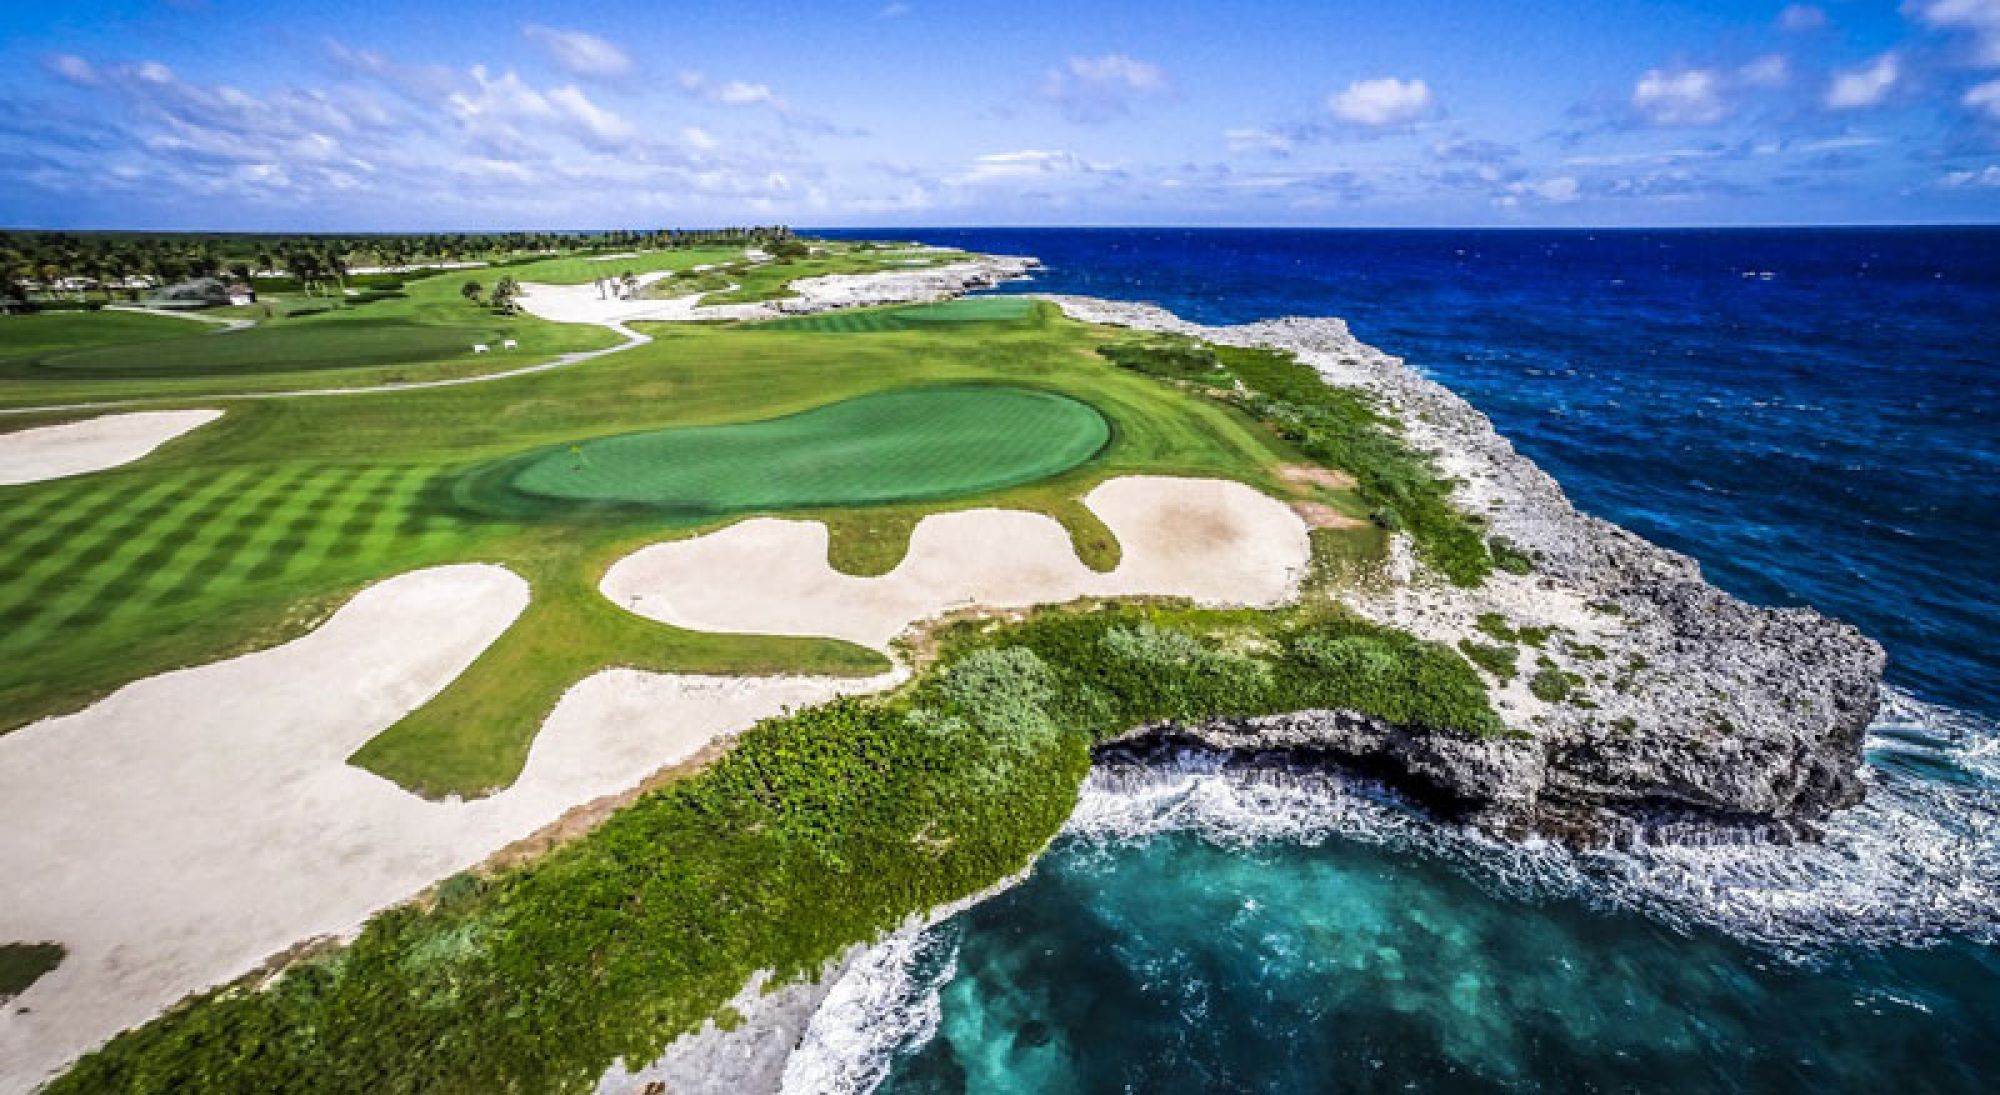 The Puntacana Golf Club's impressive golf course within astounding Dominican Republic.